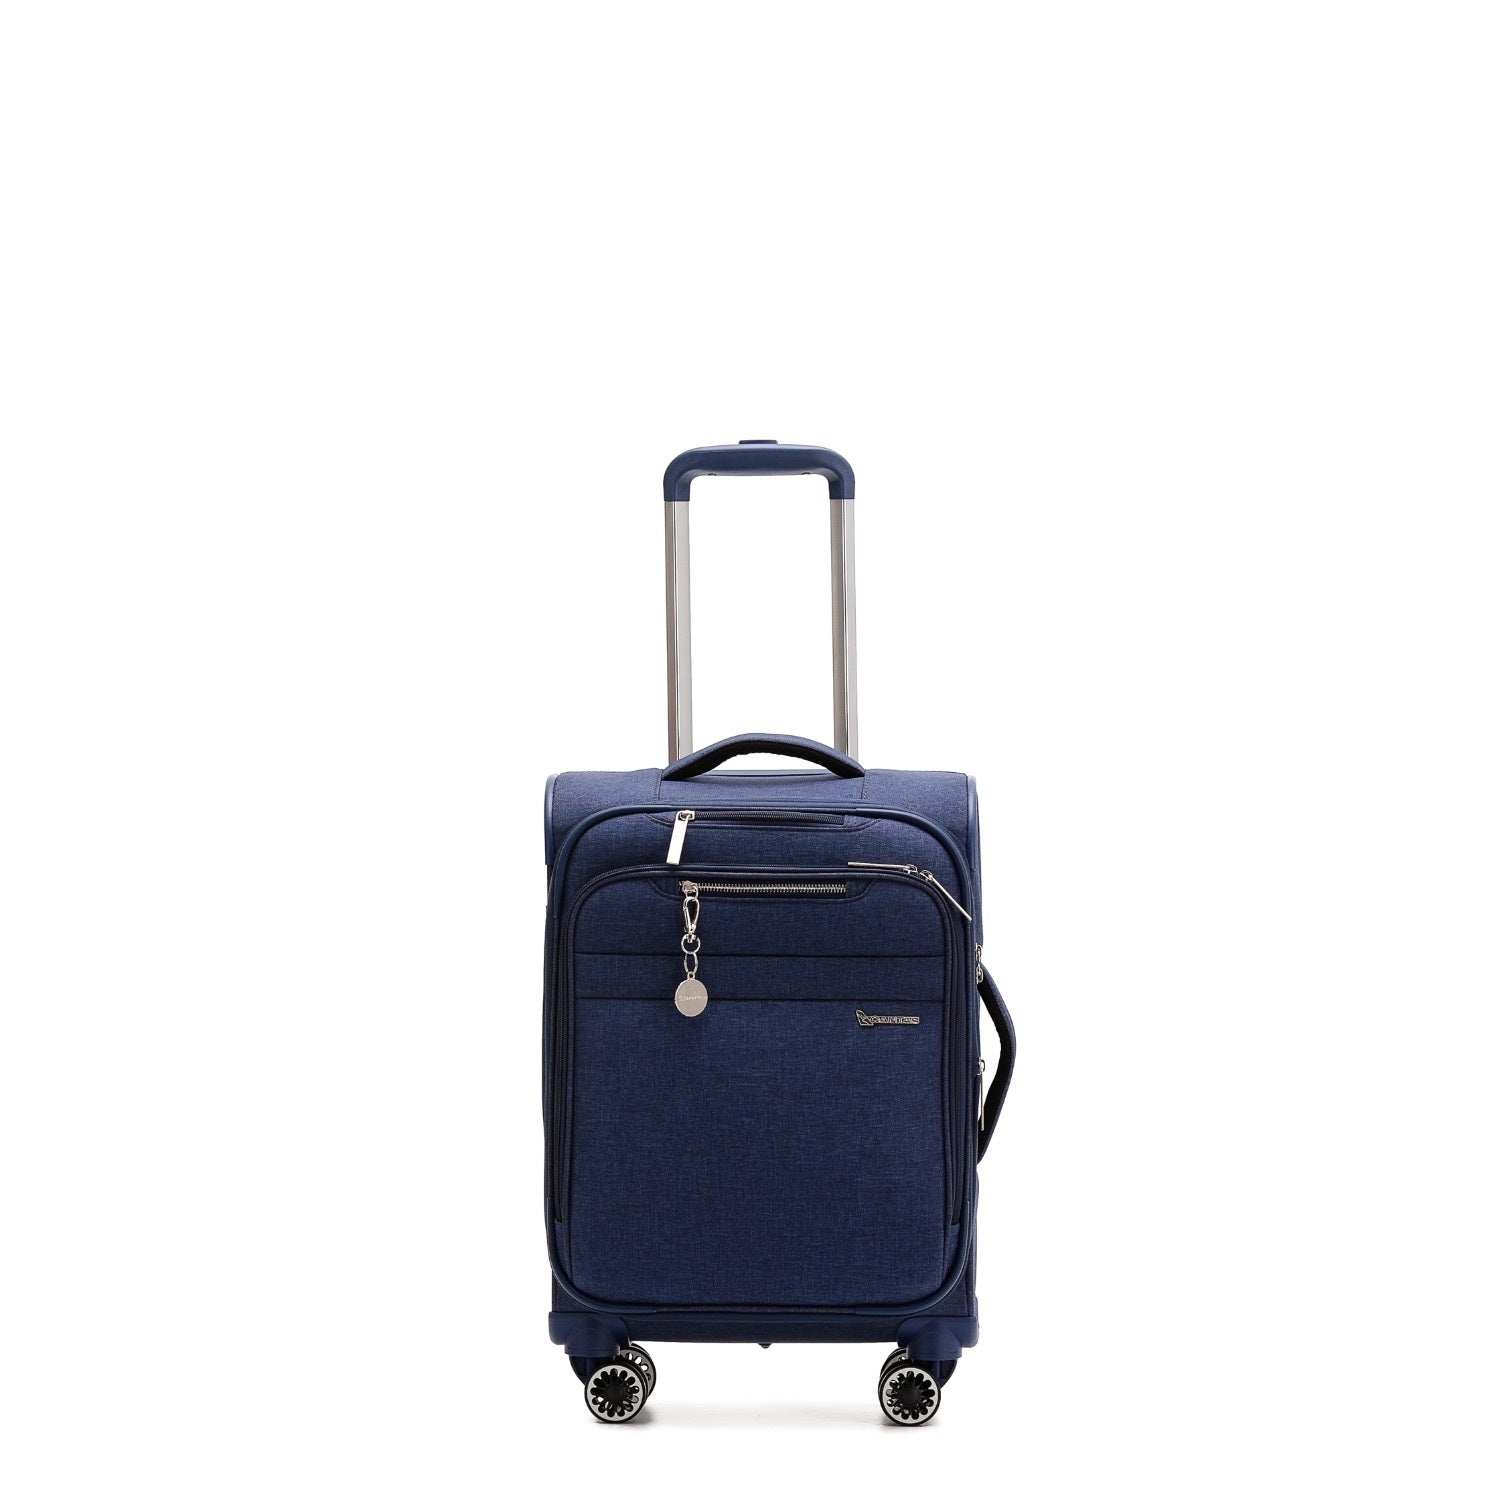 Qantas - QF400 55cm Small Adelaide Soft sided spinner - Navy